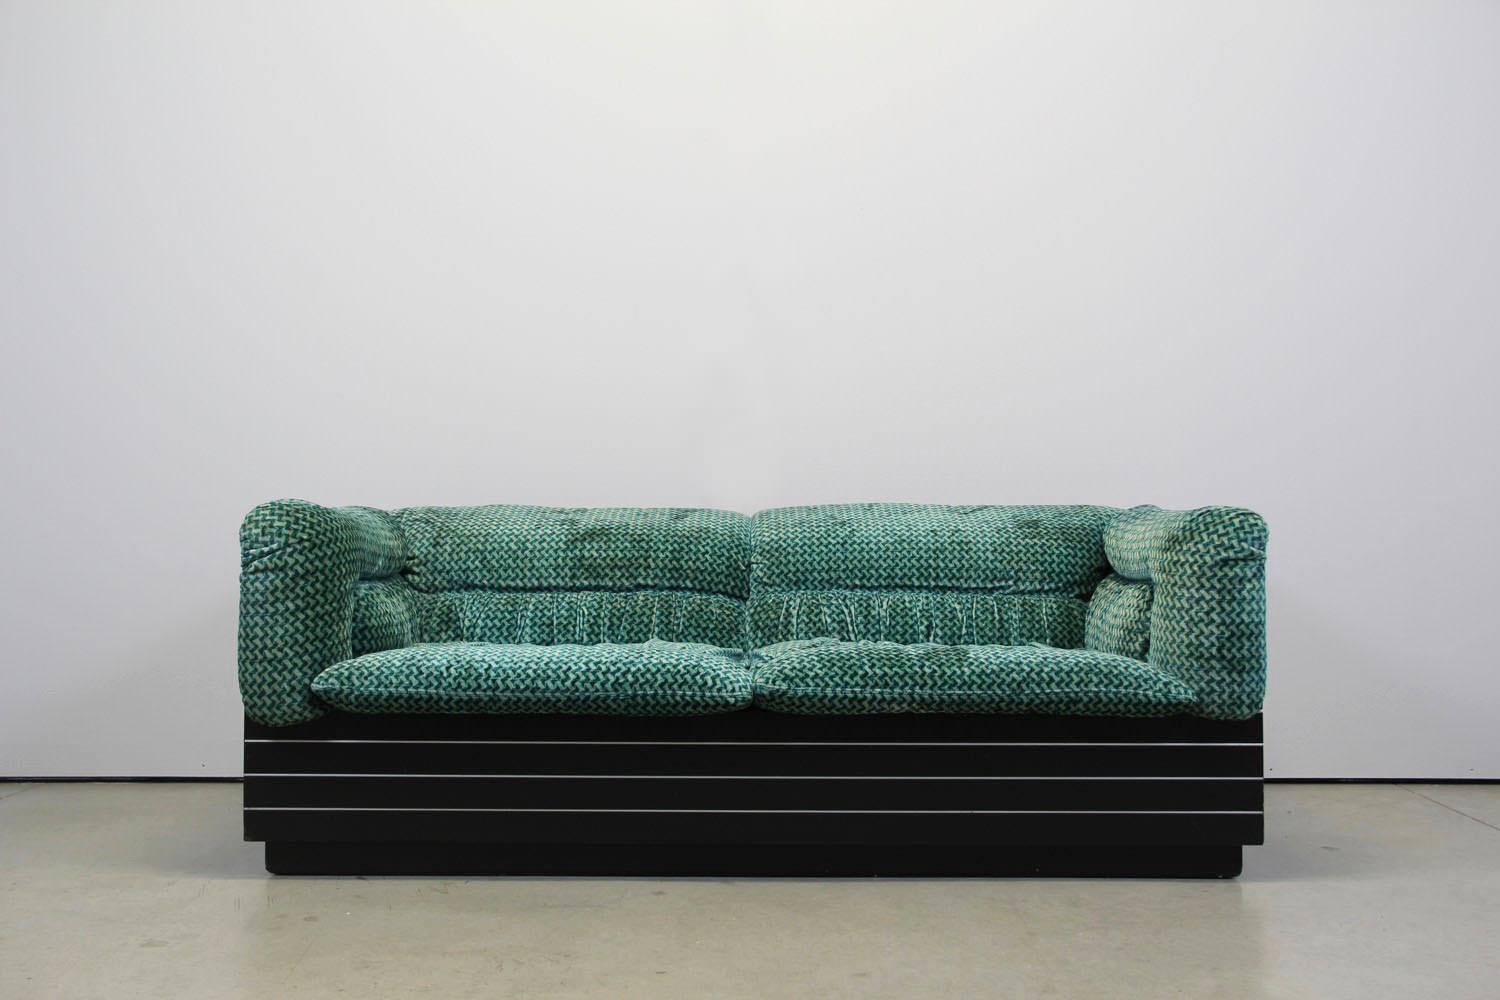 This living room set is manufactured by Saporiti Italia in the 1970s.
Design made by Giovanni Offredi.
It consist of  3-seat sofa and a 2-seat sofa including 1 coffee table.
The fabric colour is like emerald green.
The black frame from the sofa and